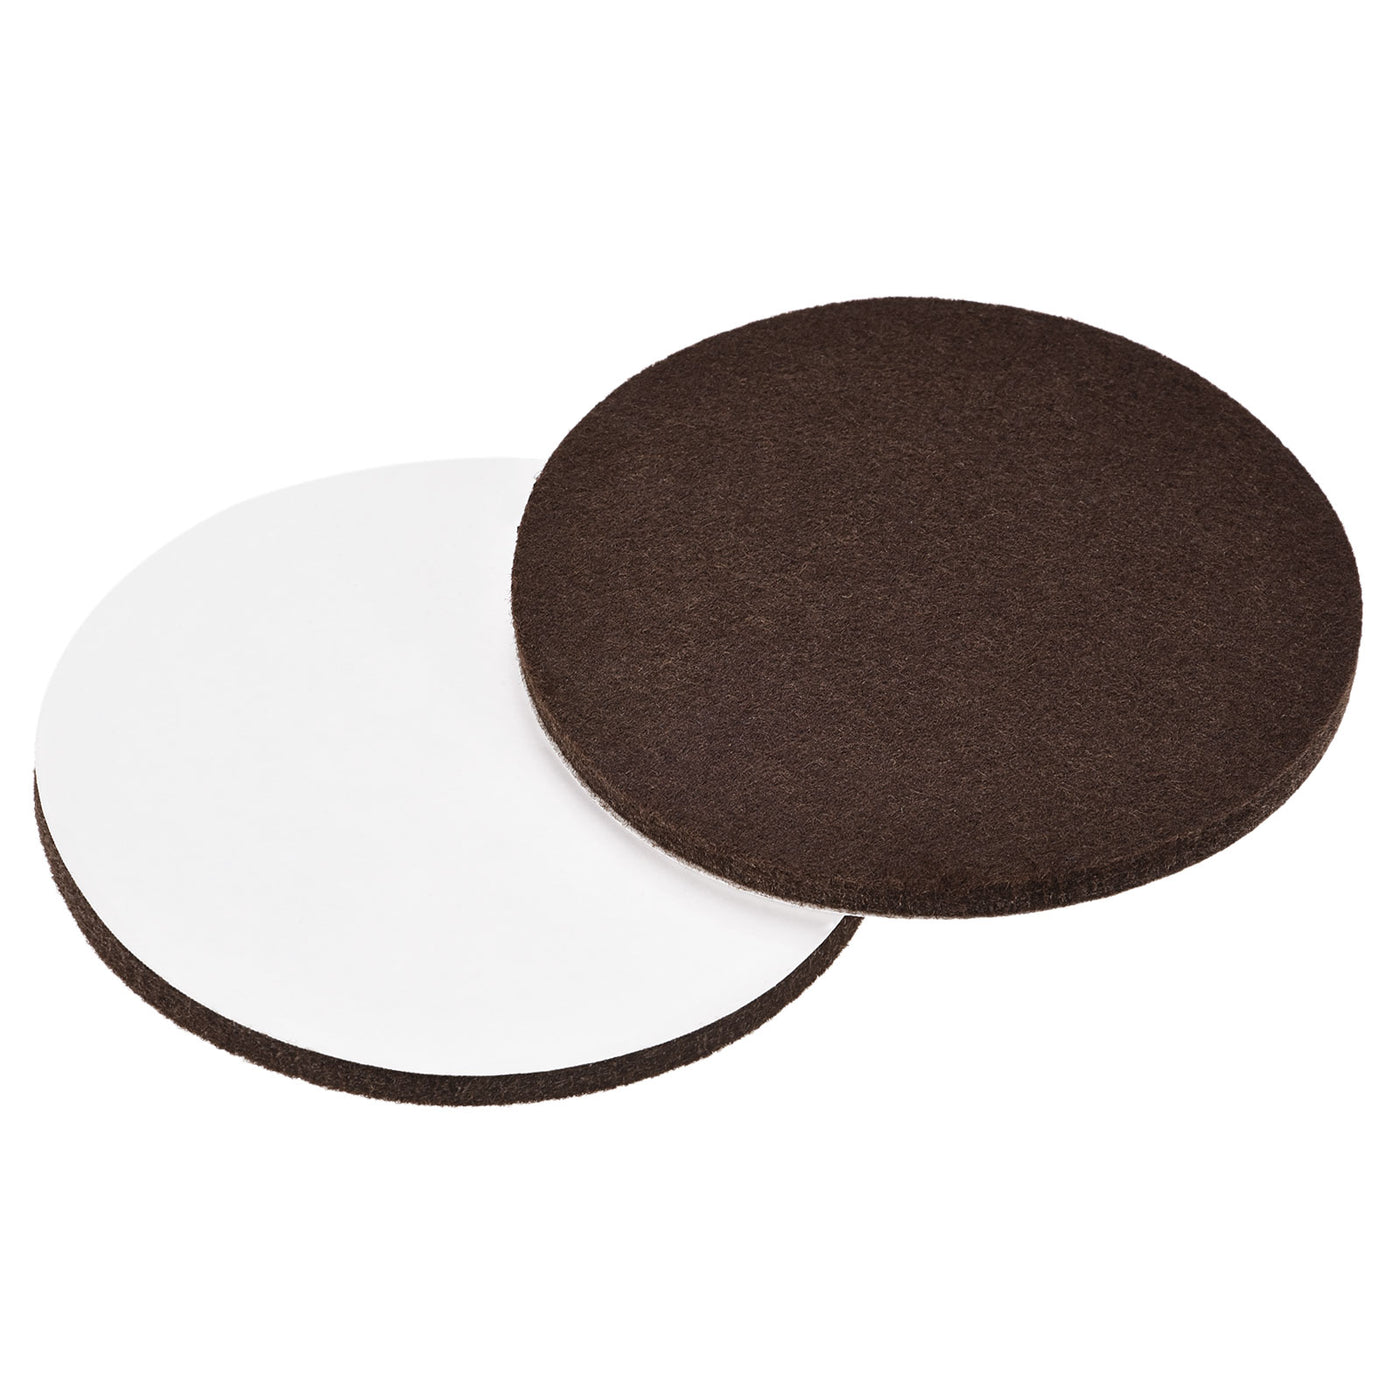 uxcell Uxcell Felt Furniture Pads 90mm Dia Self-stick Anti-scratch Floor Protector Brown 36pcs